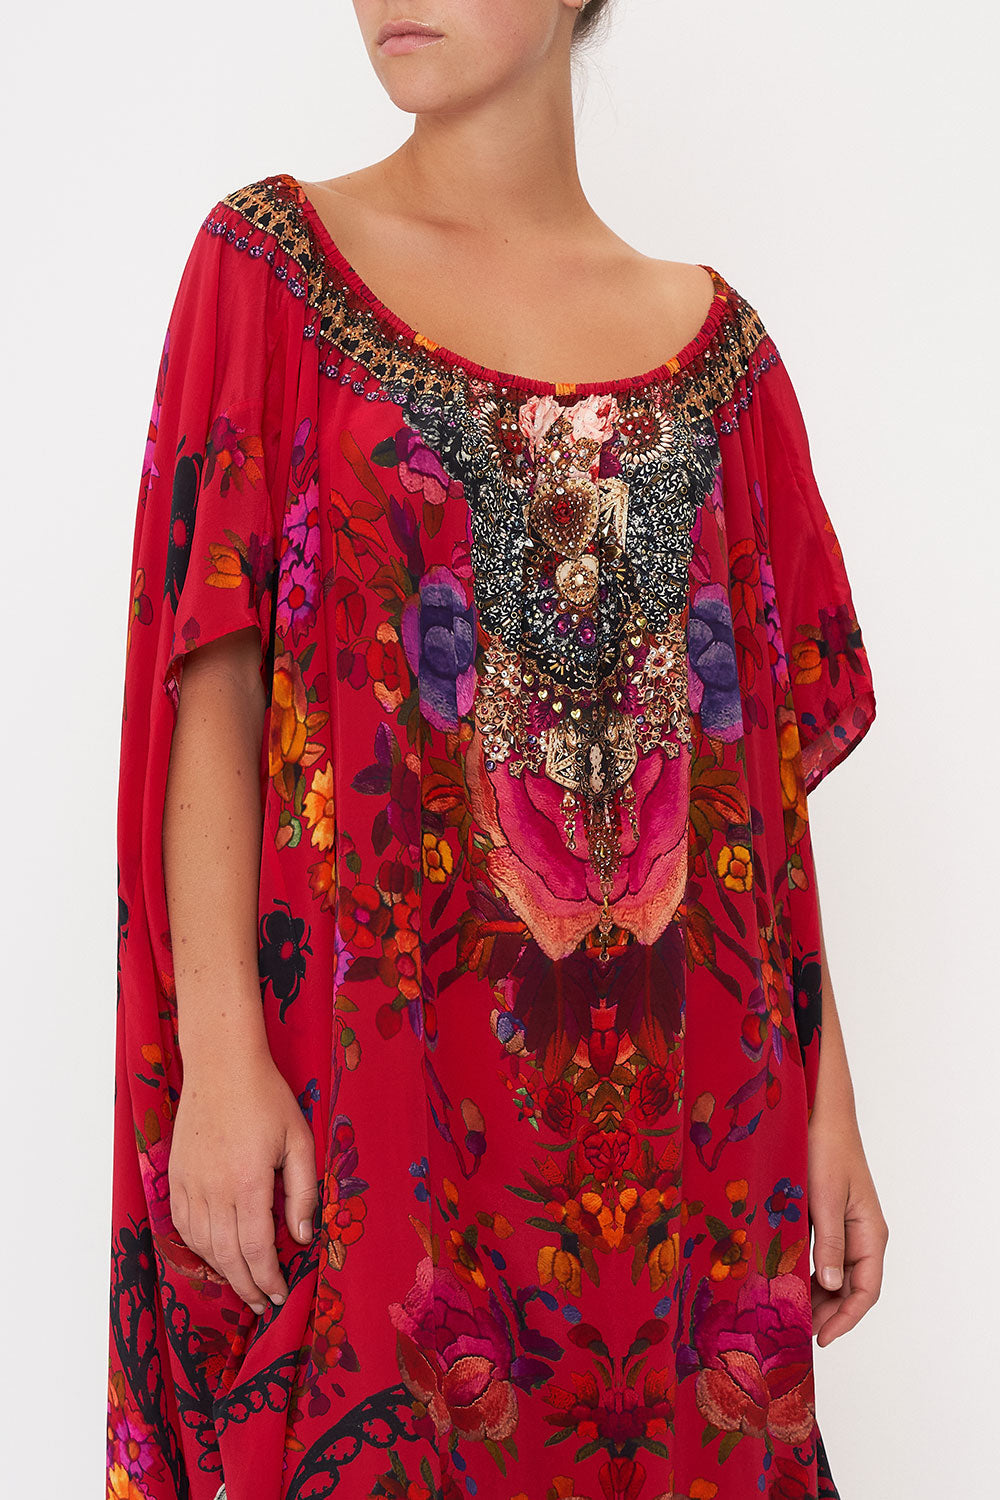 OFF SHOULDER KAFTAN VIEW FROM THE VEIL